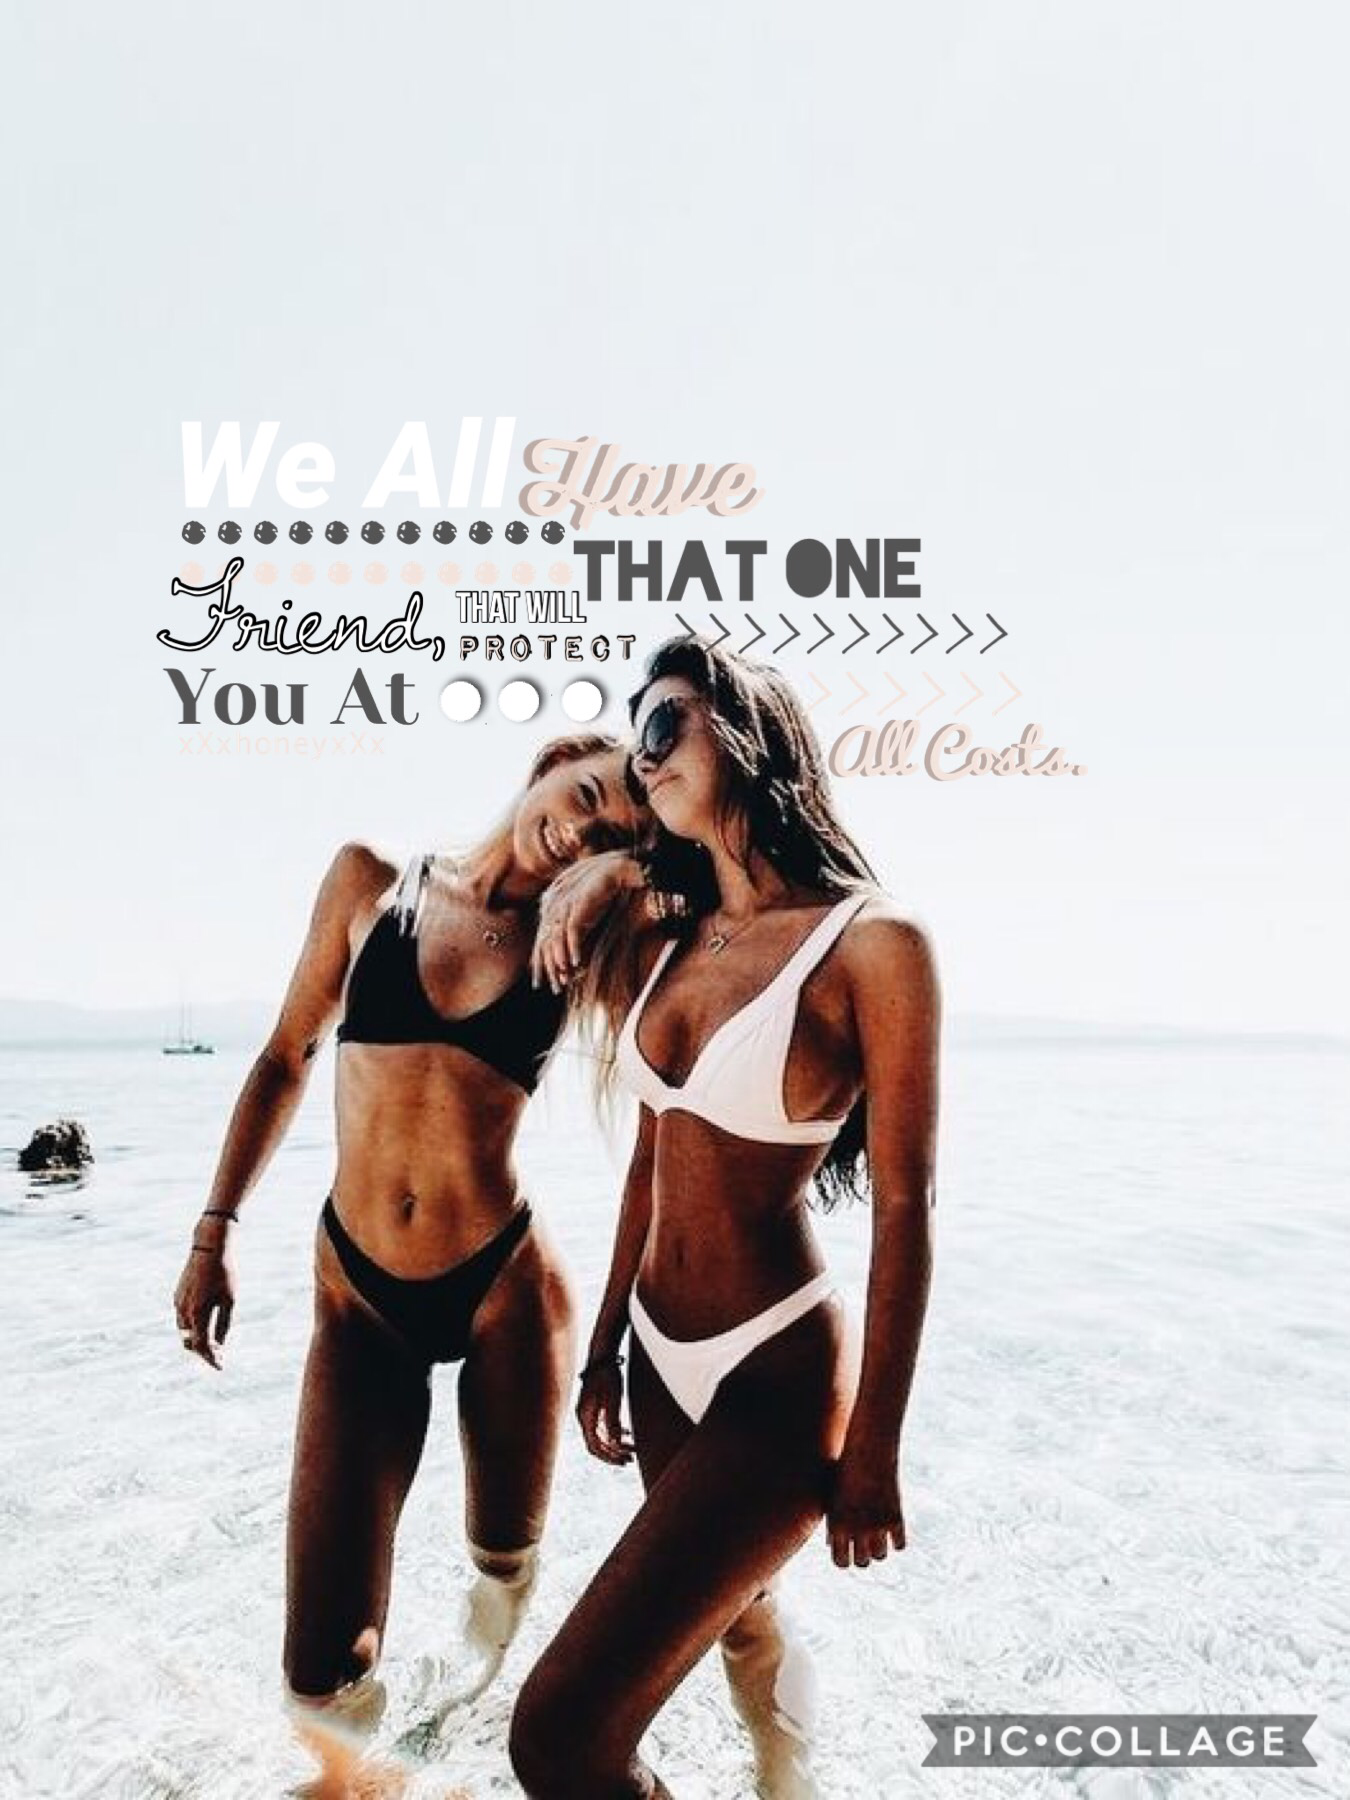 🐚TAP🐚

Aww, this is my own QUOTE. Okay, if we are gonna be honest, I AM that one friend that would protect you at all costs 😂. Haha, I hope everyone is having a wonderful day 💖!